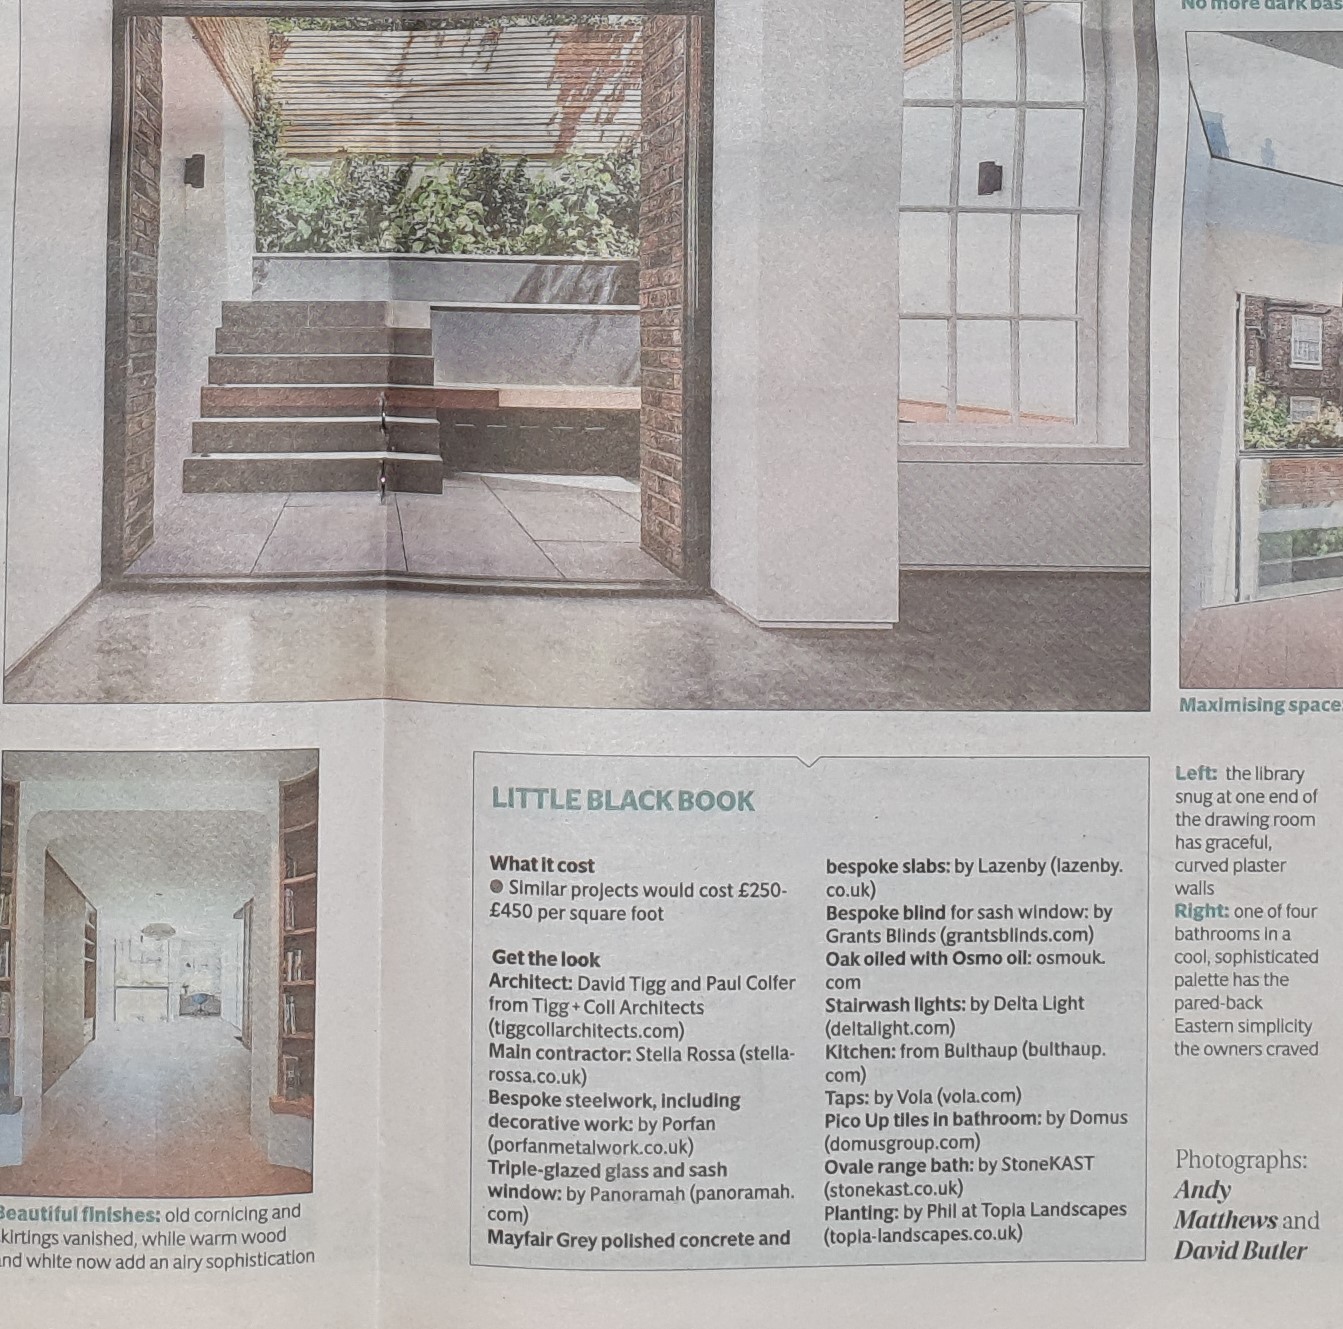 Close up of Evening Standard mention of Porfan Metalwork